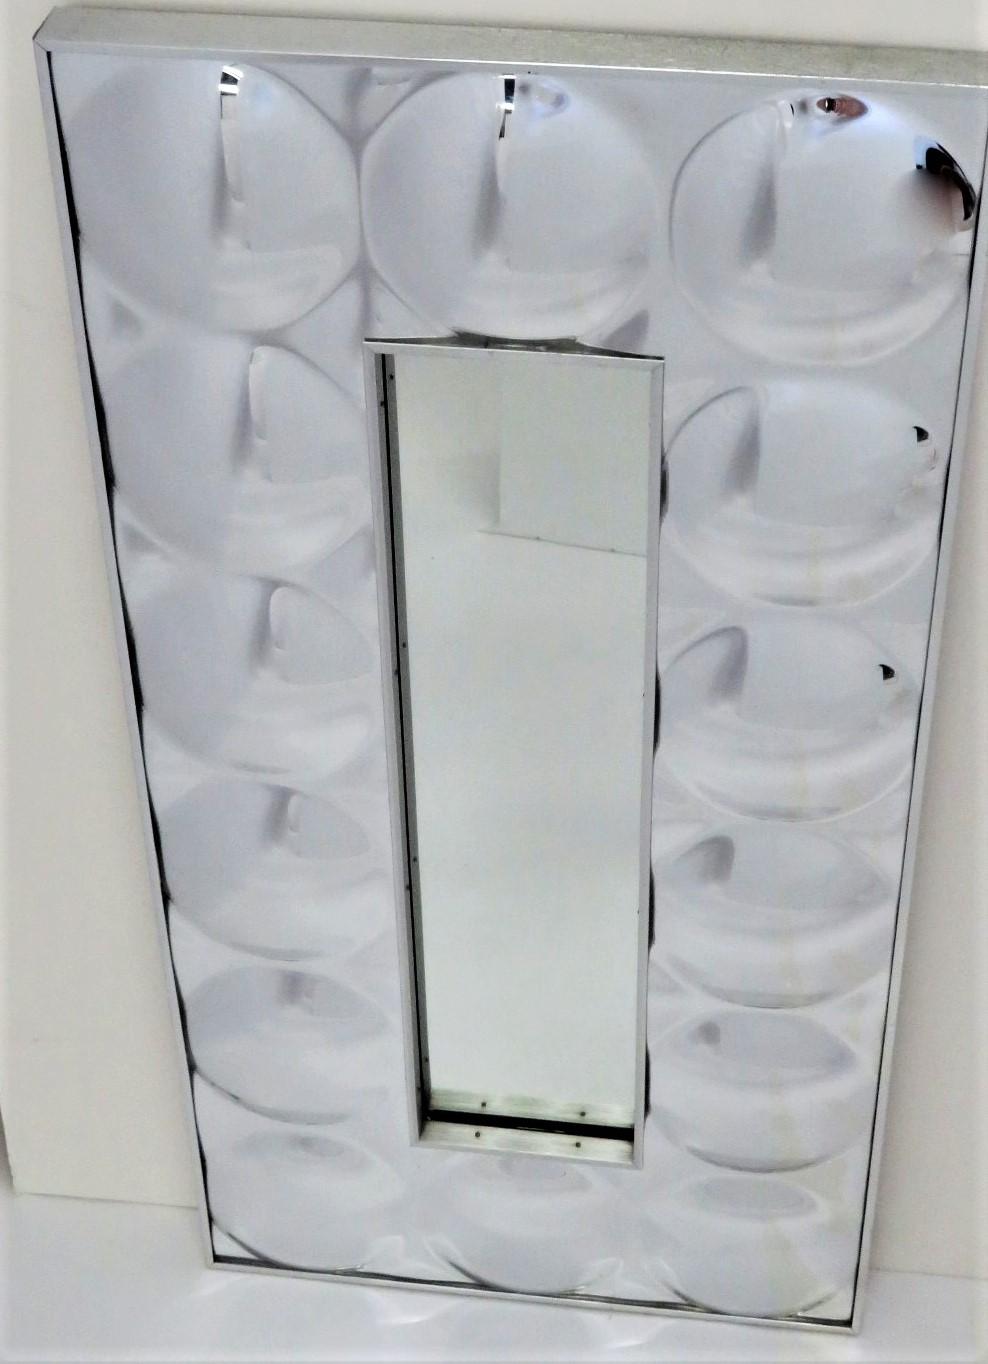 Fabulous Space Age Modern Mirror with 14 convex circular bubble acrylic mirrors surrounding a rectangular mirror in the center. Made by Turner, label on the back.  In very good condition, no issues. Just wonderful !

Measurements: 36 inches